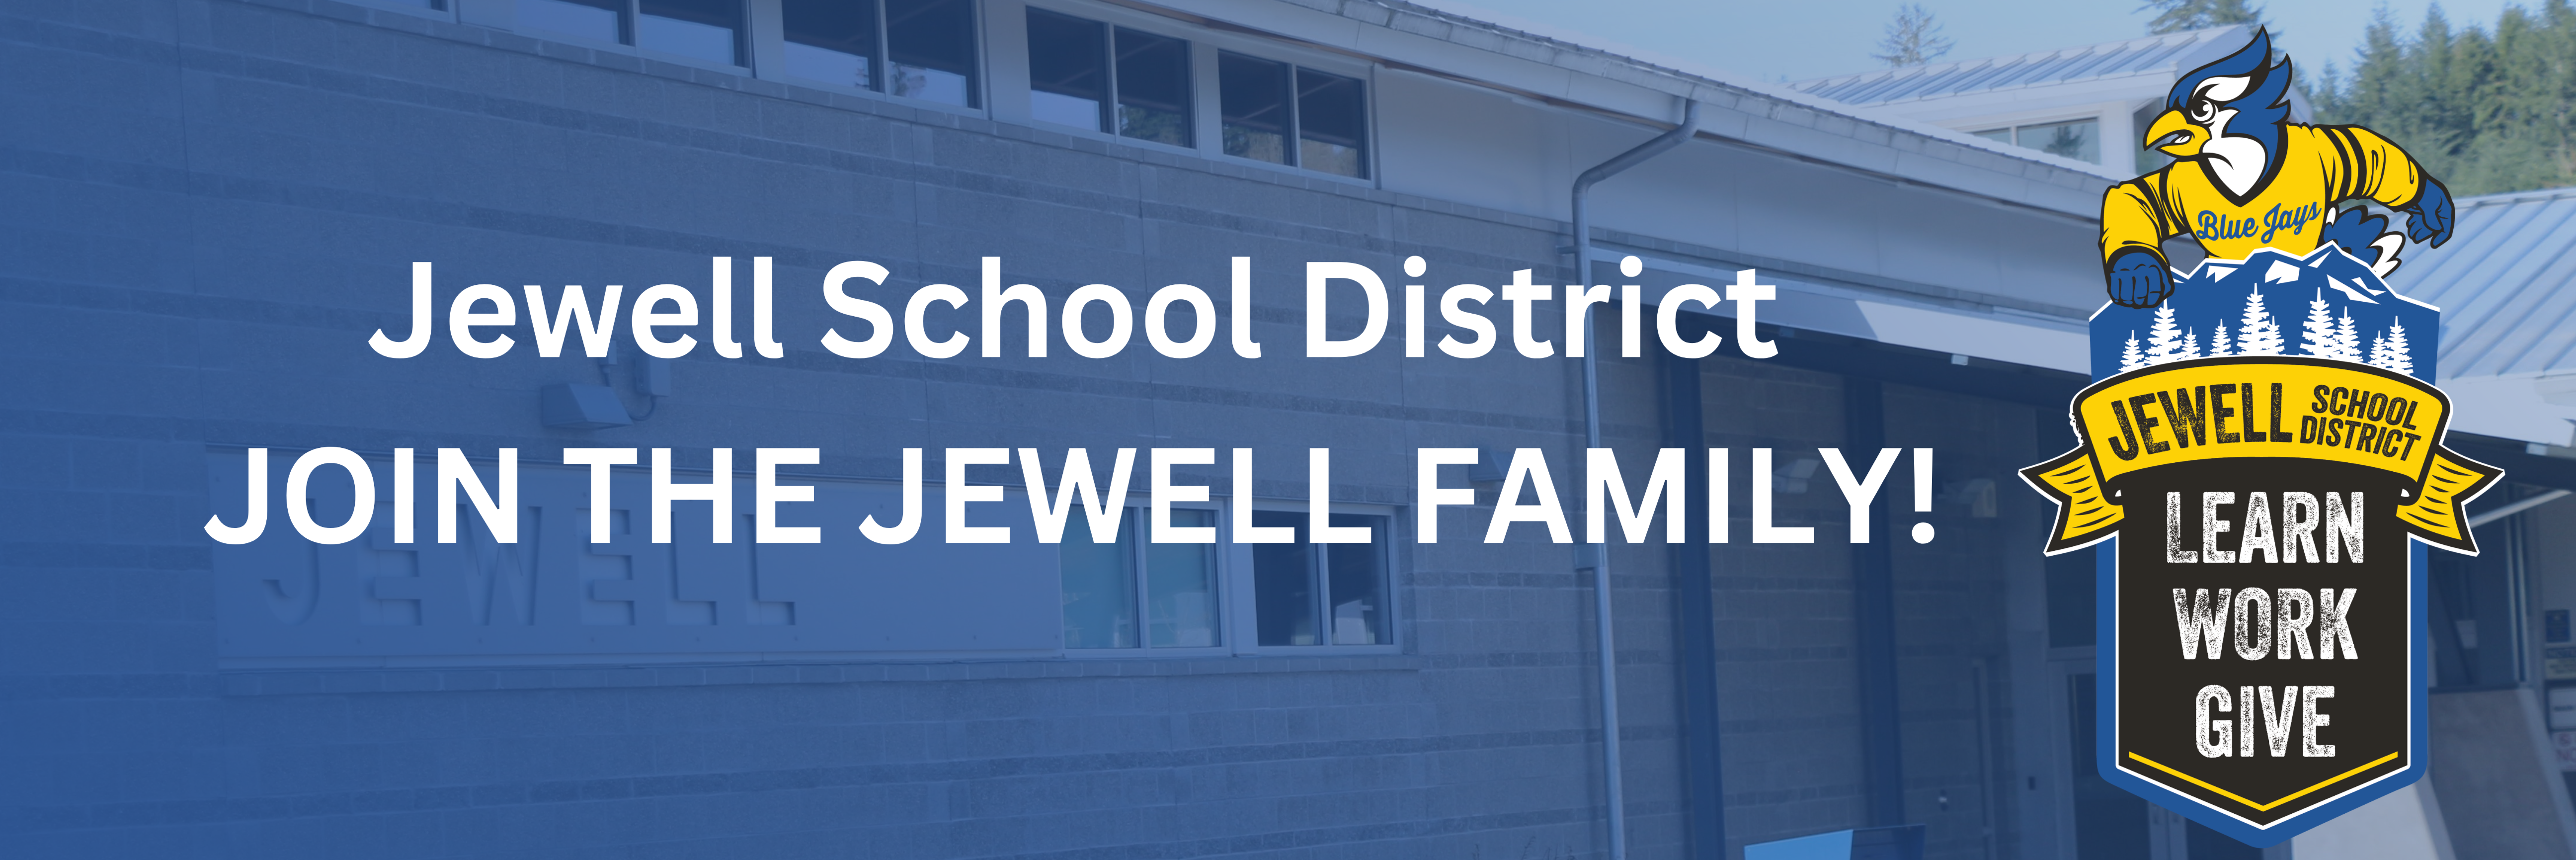 Jewell school district. Join THE Jewell family.